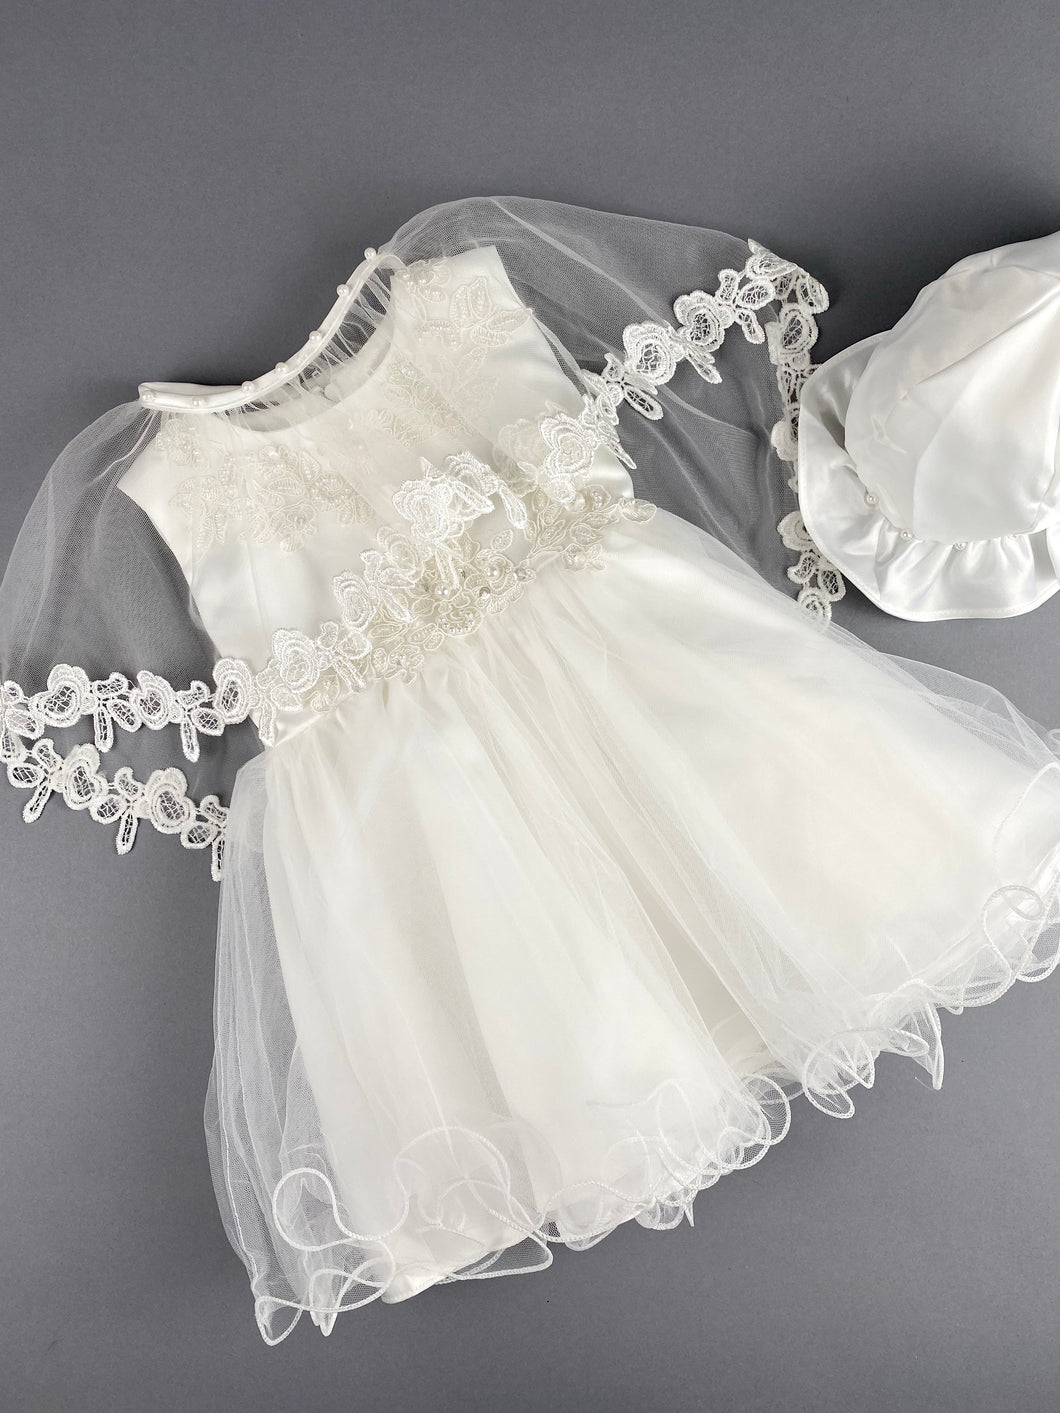 Girls Christening Baptismal Embroidered 3pc Dress 44 with Pearls, Embroidered Cape and Hat